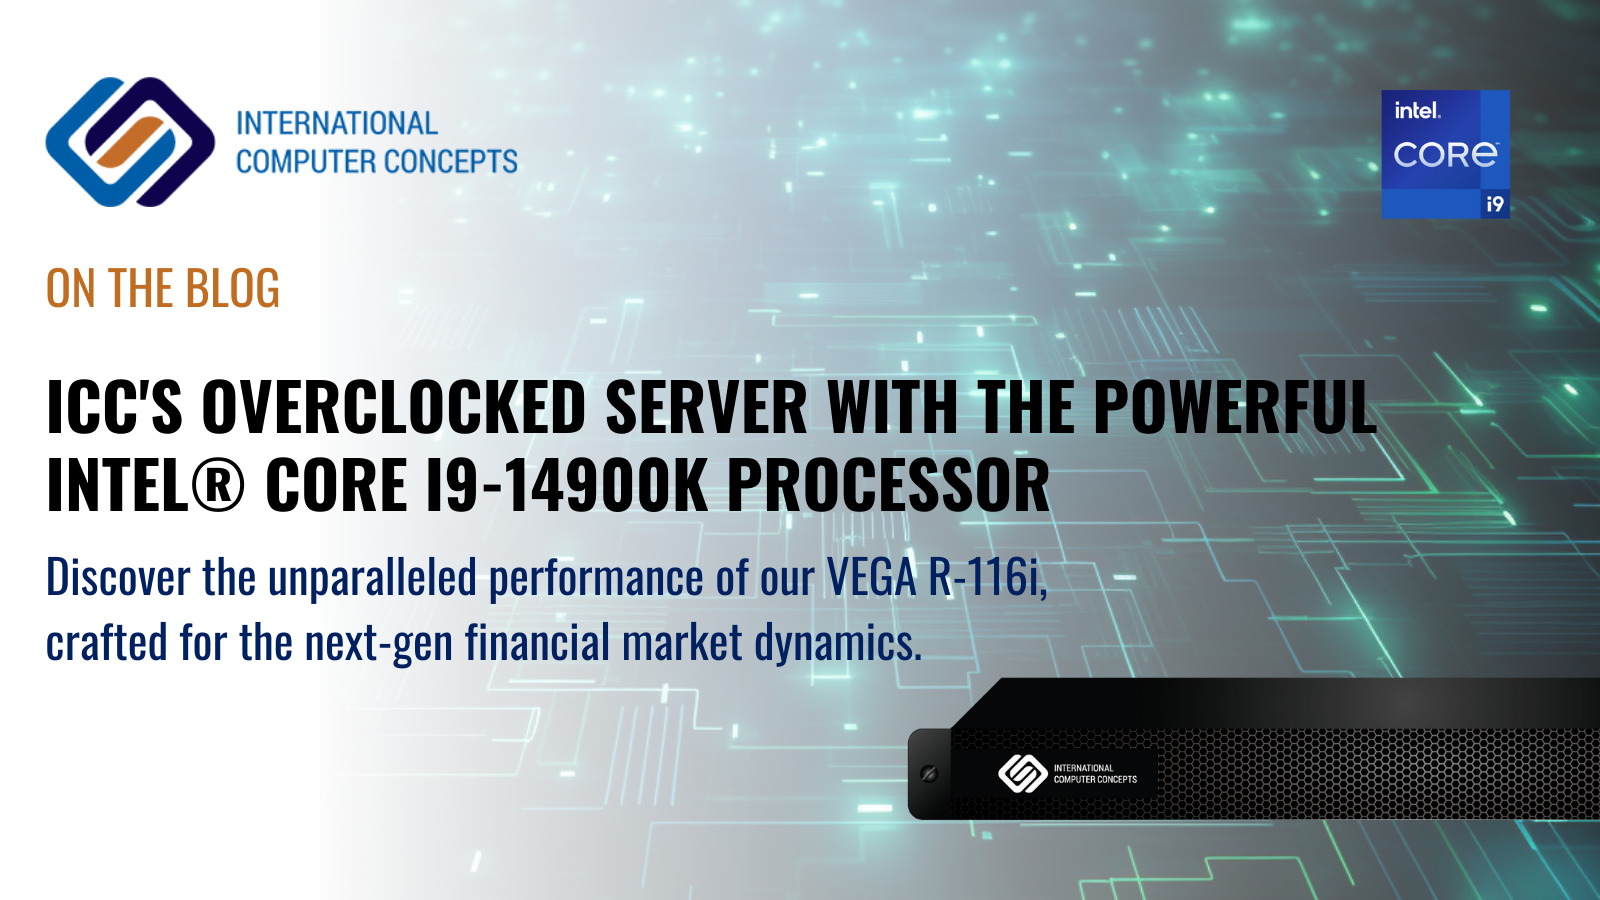 ICC's Overclocked Server with the Powerful Intel® Core i9-14900K Processor